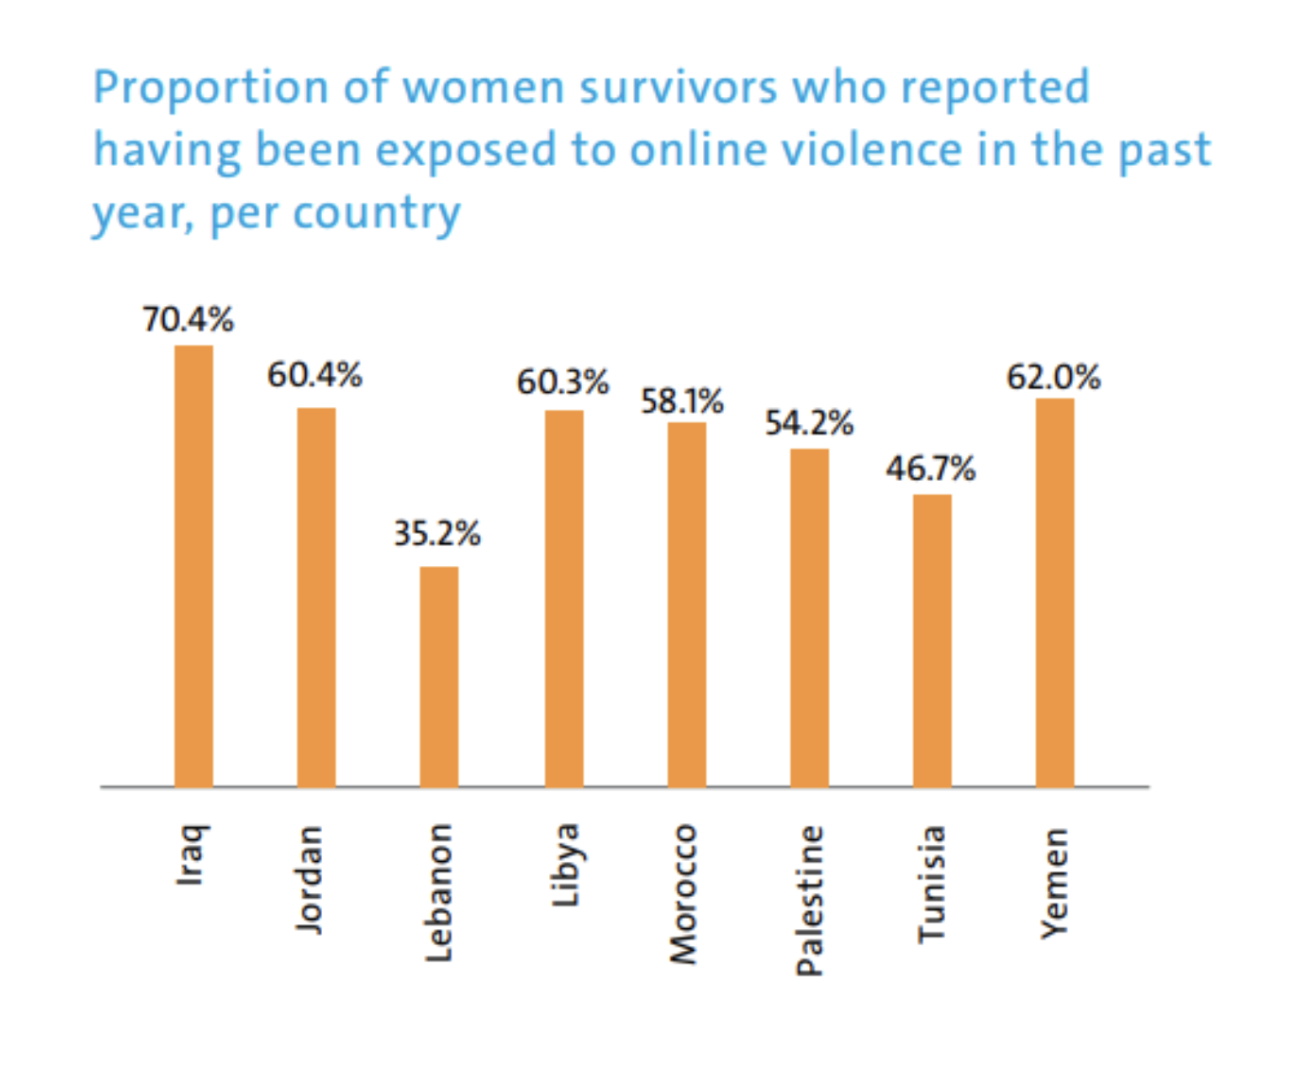 Chart depicting the proportion of women survivors who reported being exposed to online violence in the past year, per country 